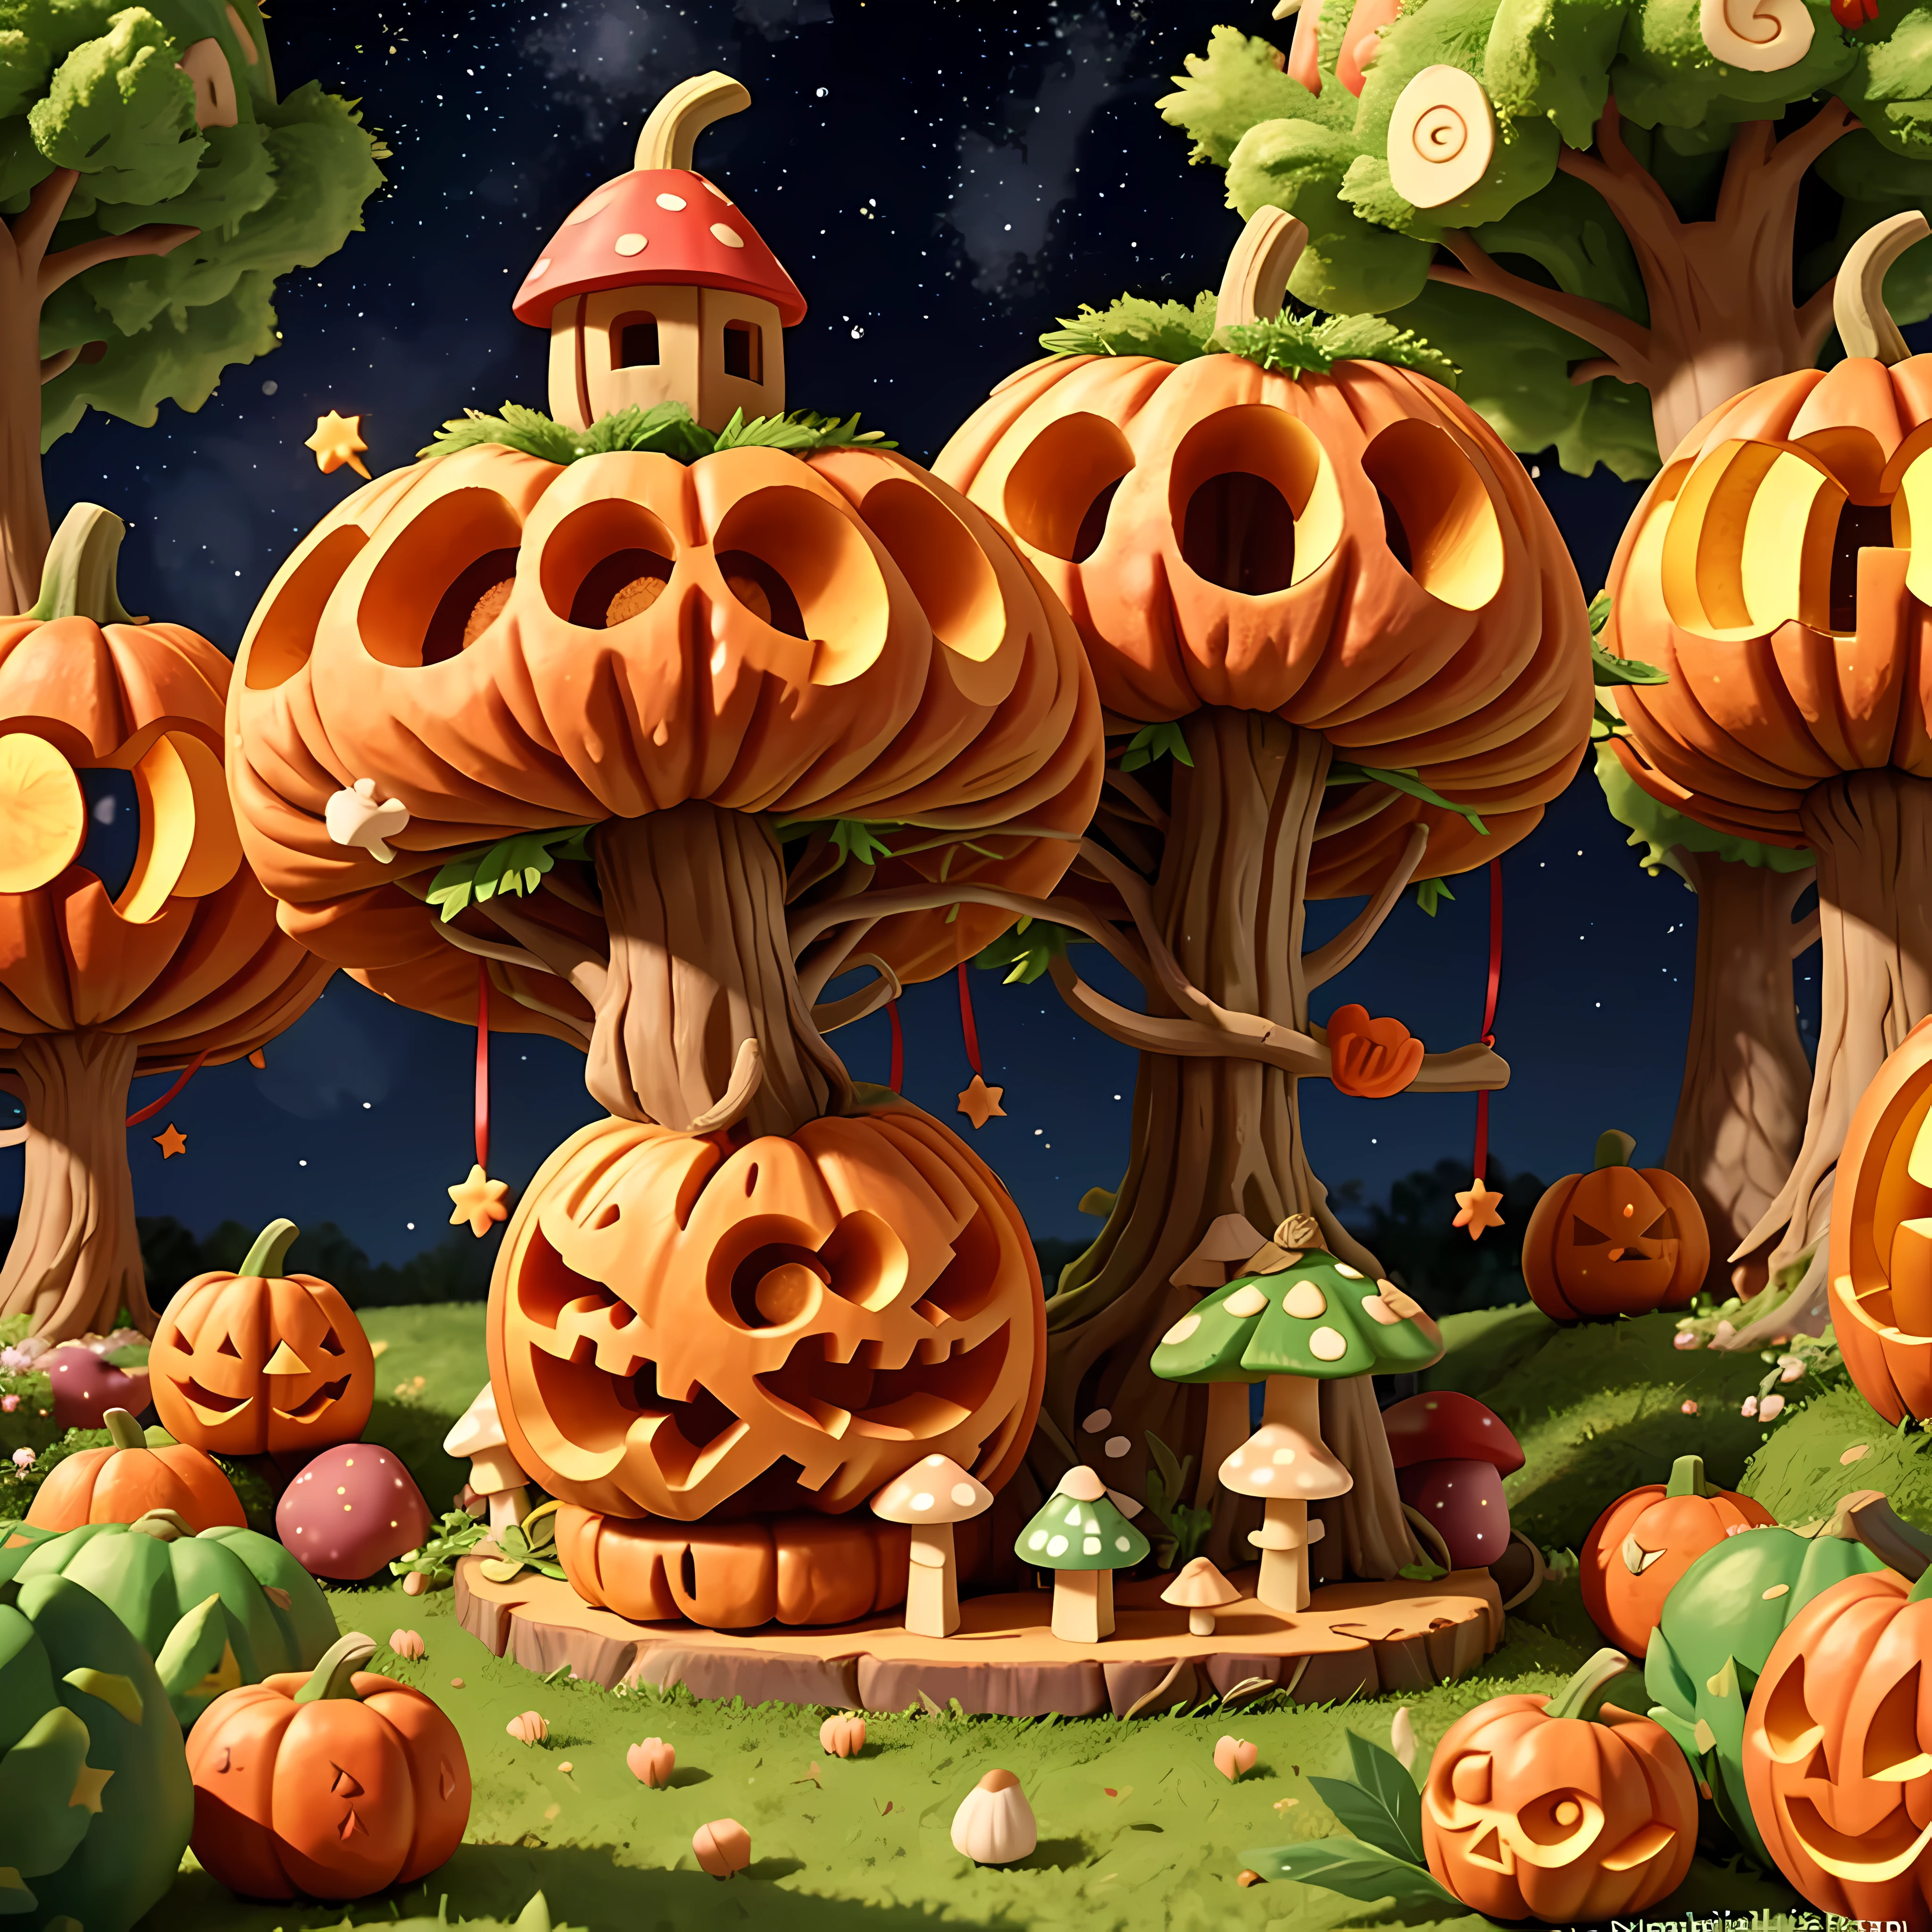 Masterpiece in maximum 16K resolution. | Professional colorful 3D, pumpkin ((((carving)))), whimsical enchanting fairy forest with mushroom houses and tall trees, festival atmosphere at starry night. | ((More_Detail))